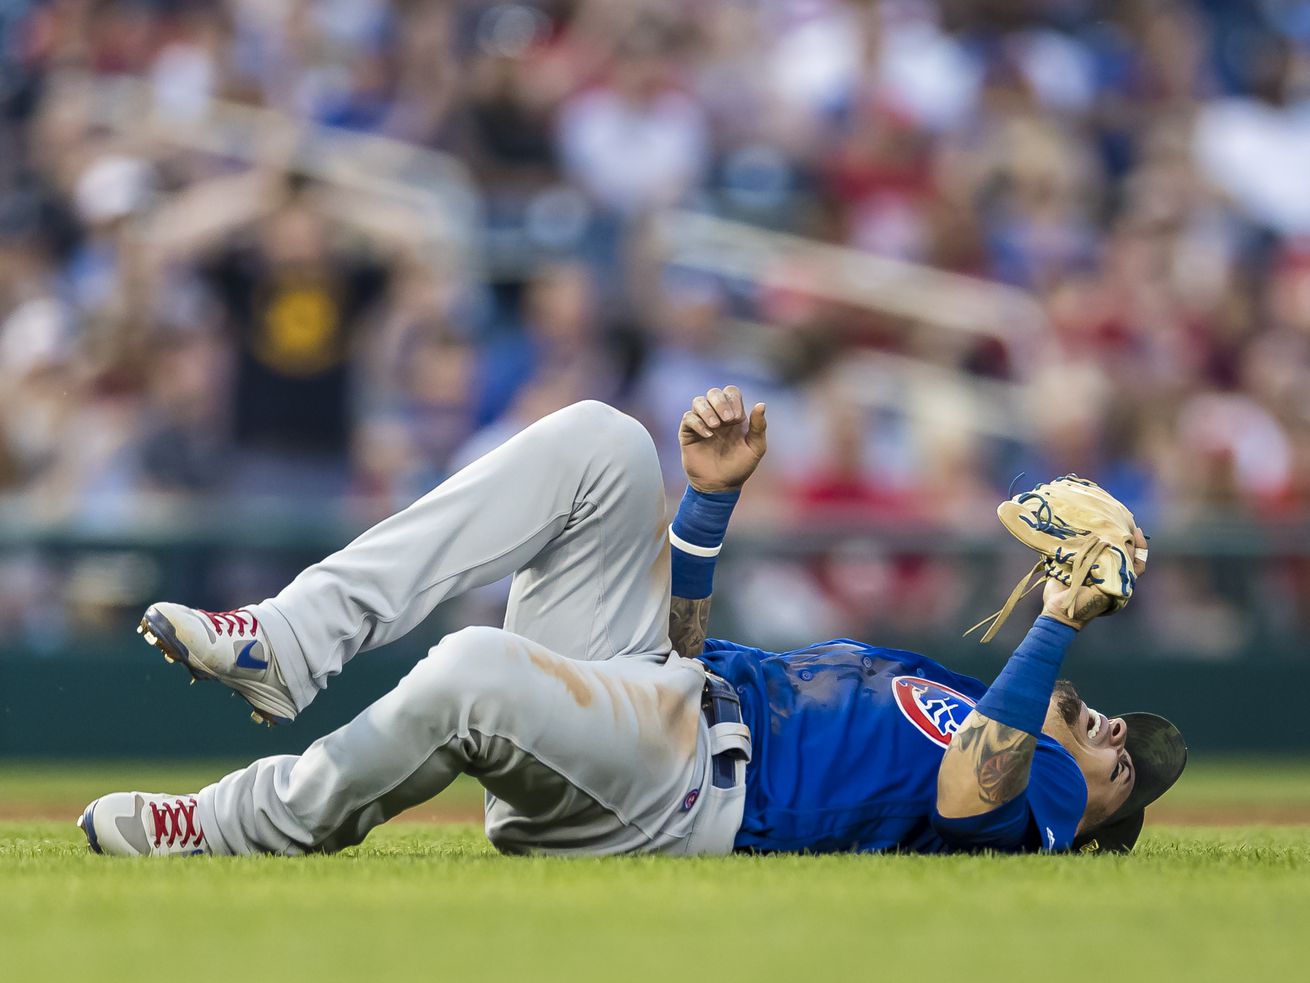 Baez on the ground in pain after making a spectacular, charging play on a slow roller to short in Sunday’s third inning.